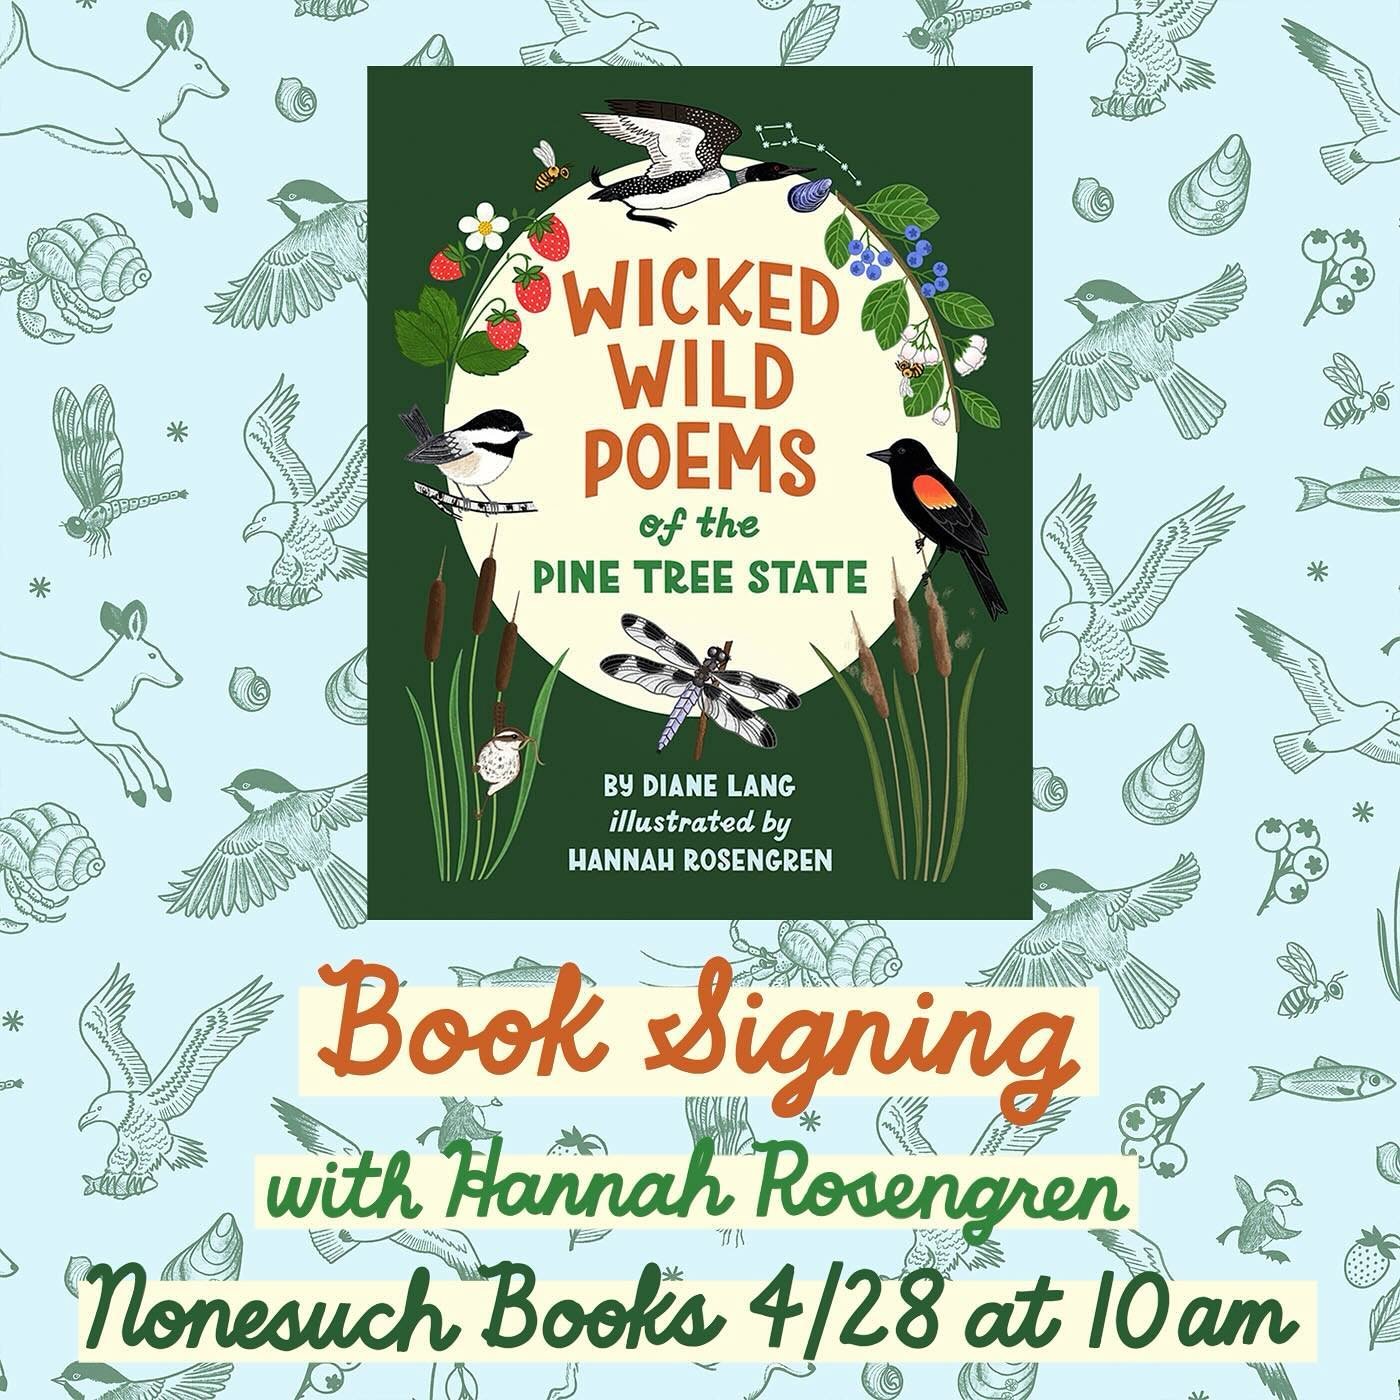 To celebrate National Poetry Month, I&rsquo;ll be doing a Wicked Wild Poems book signing at @nonesuchsopo next weekend! Working at Nonesuch was one of my summer jobs in high school and I always loved their children&rsquo;s book section. It&rsquo;s be